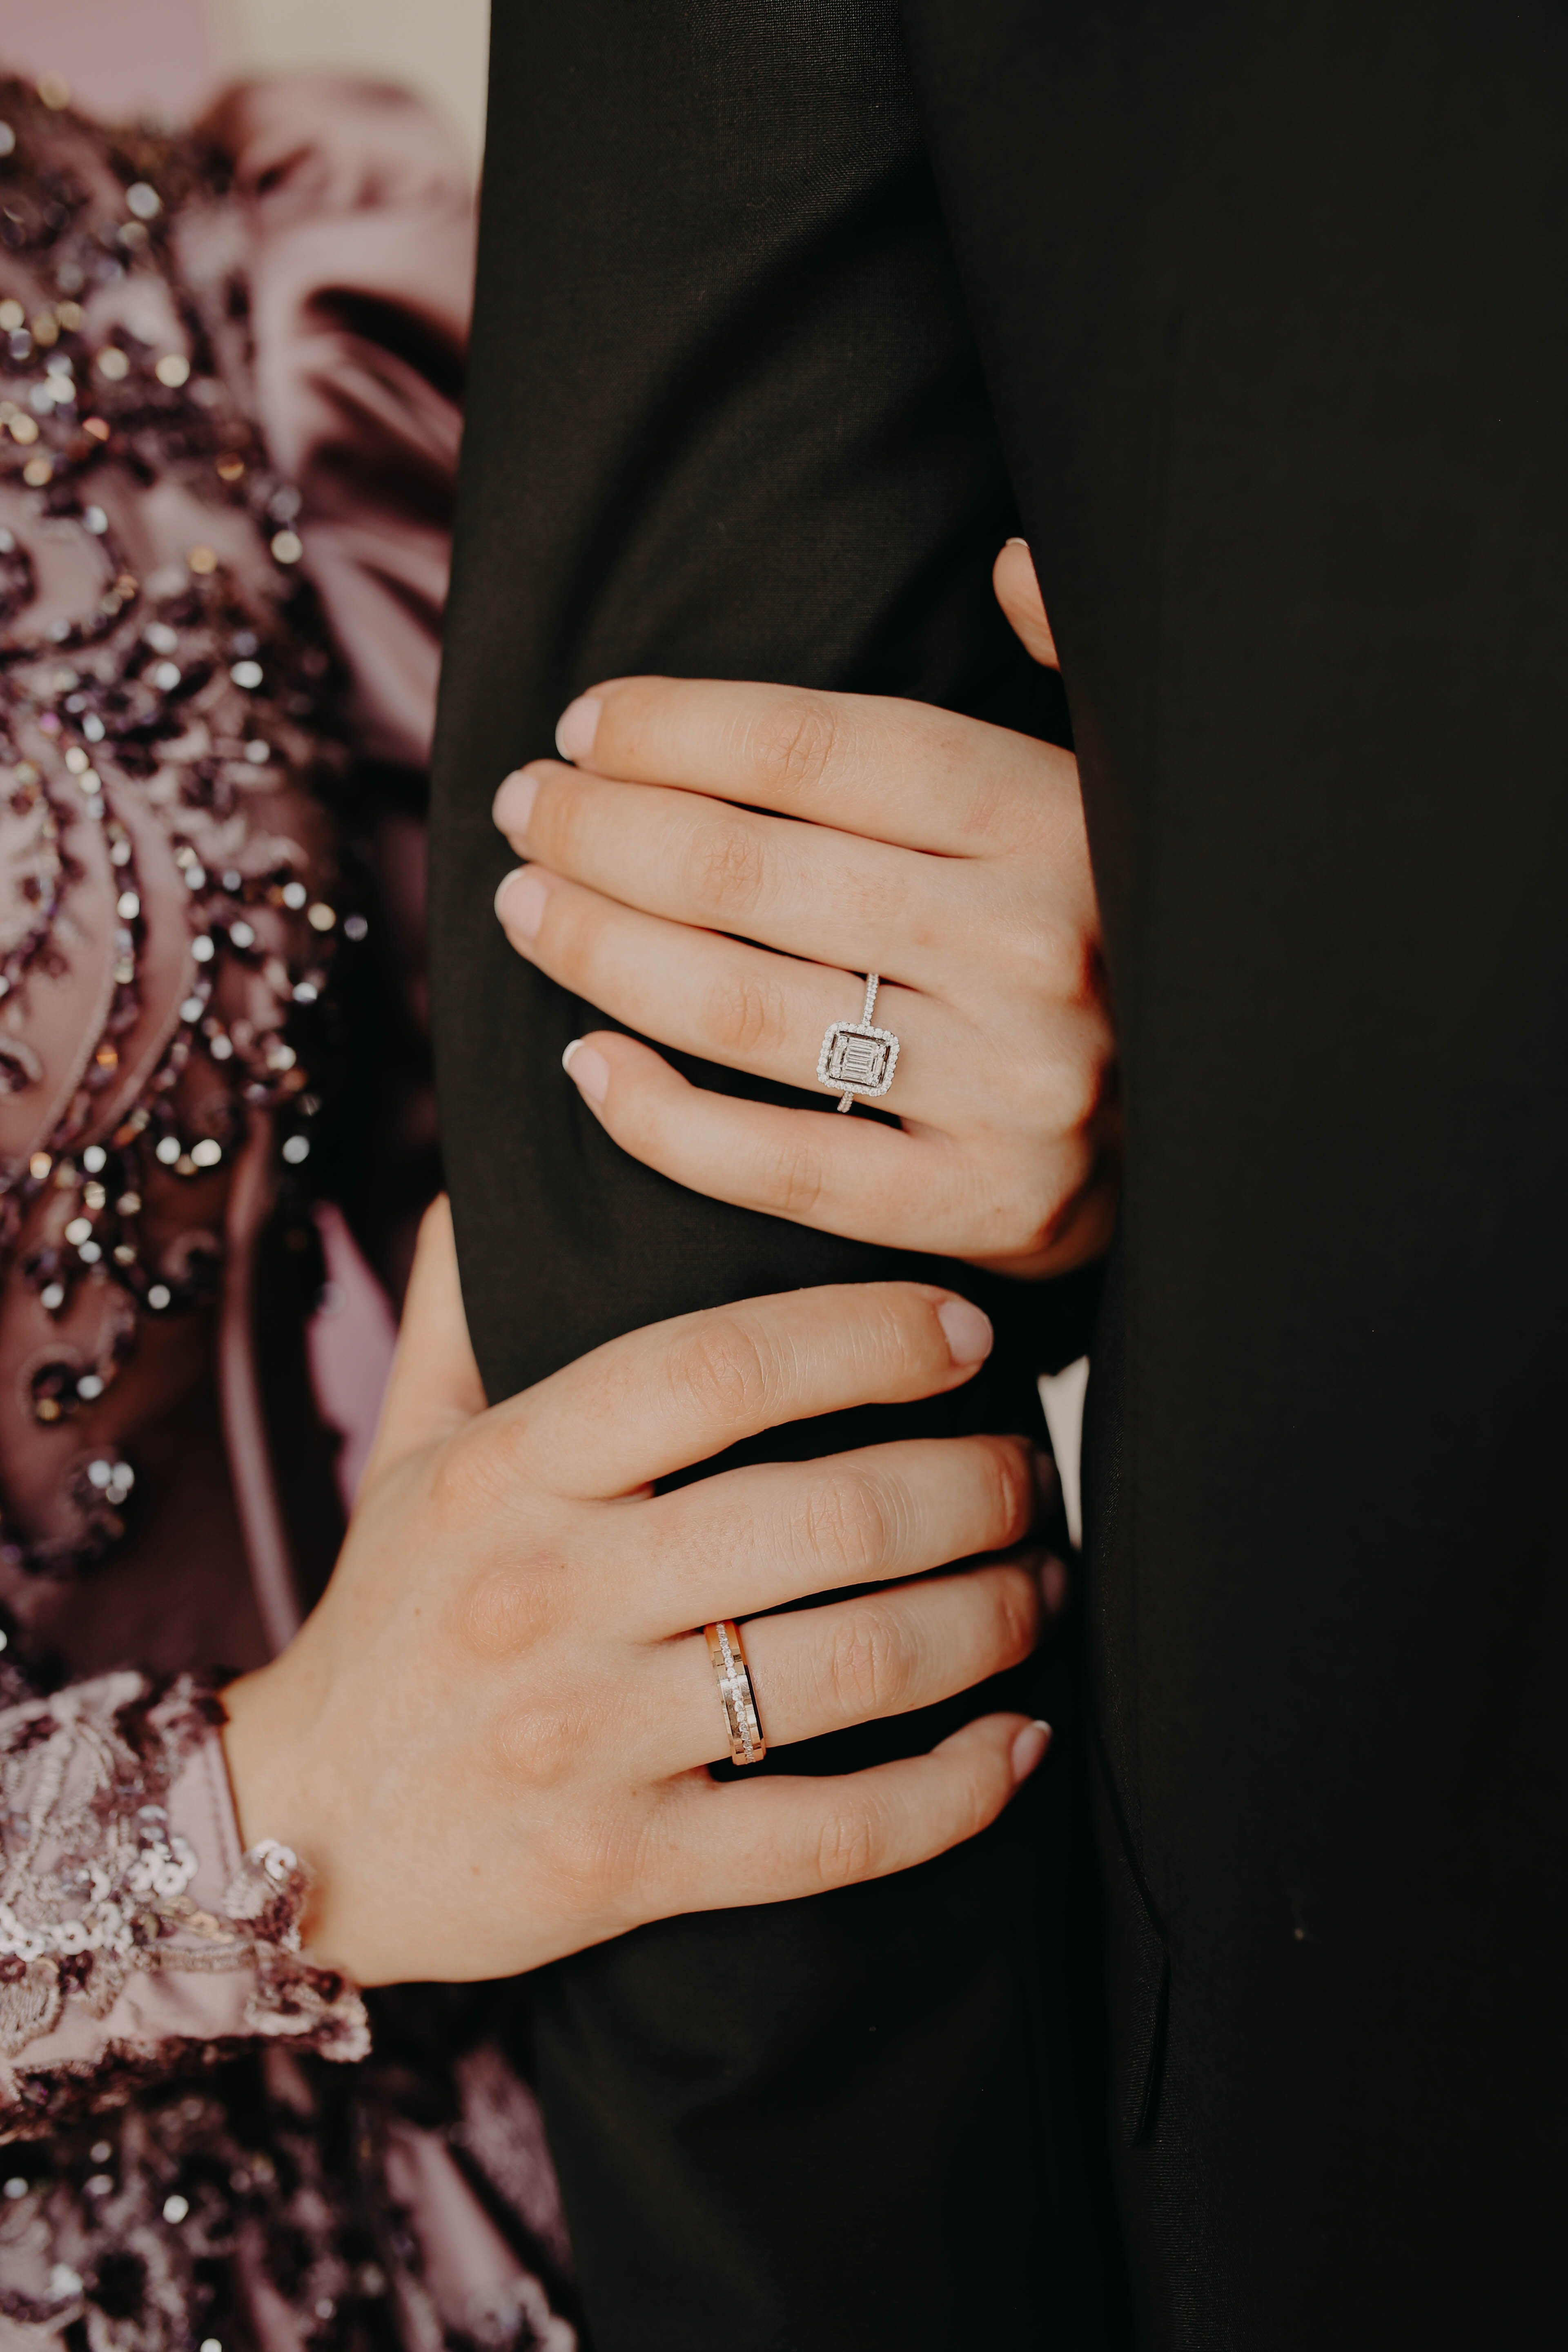 Sadie forgave Melinda, and she was happy that the wedding could proceed | Source: Pexels